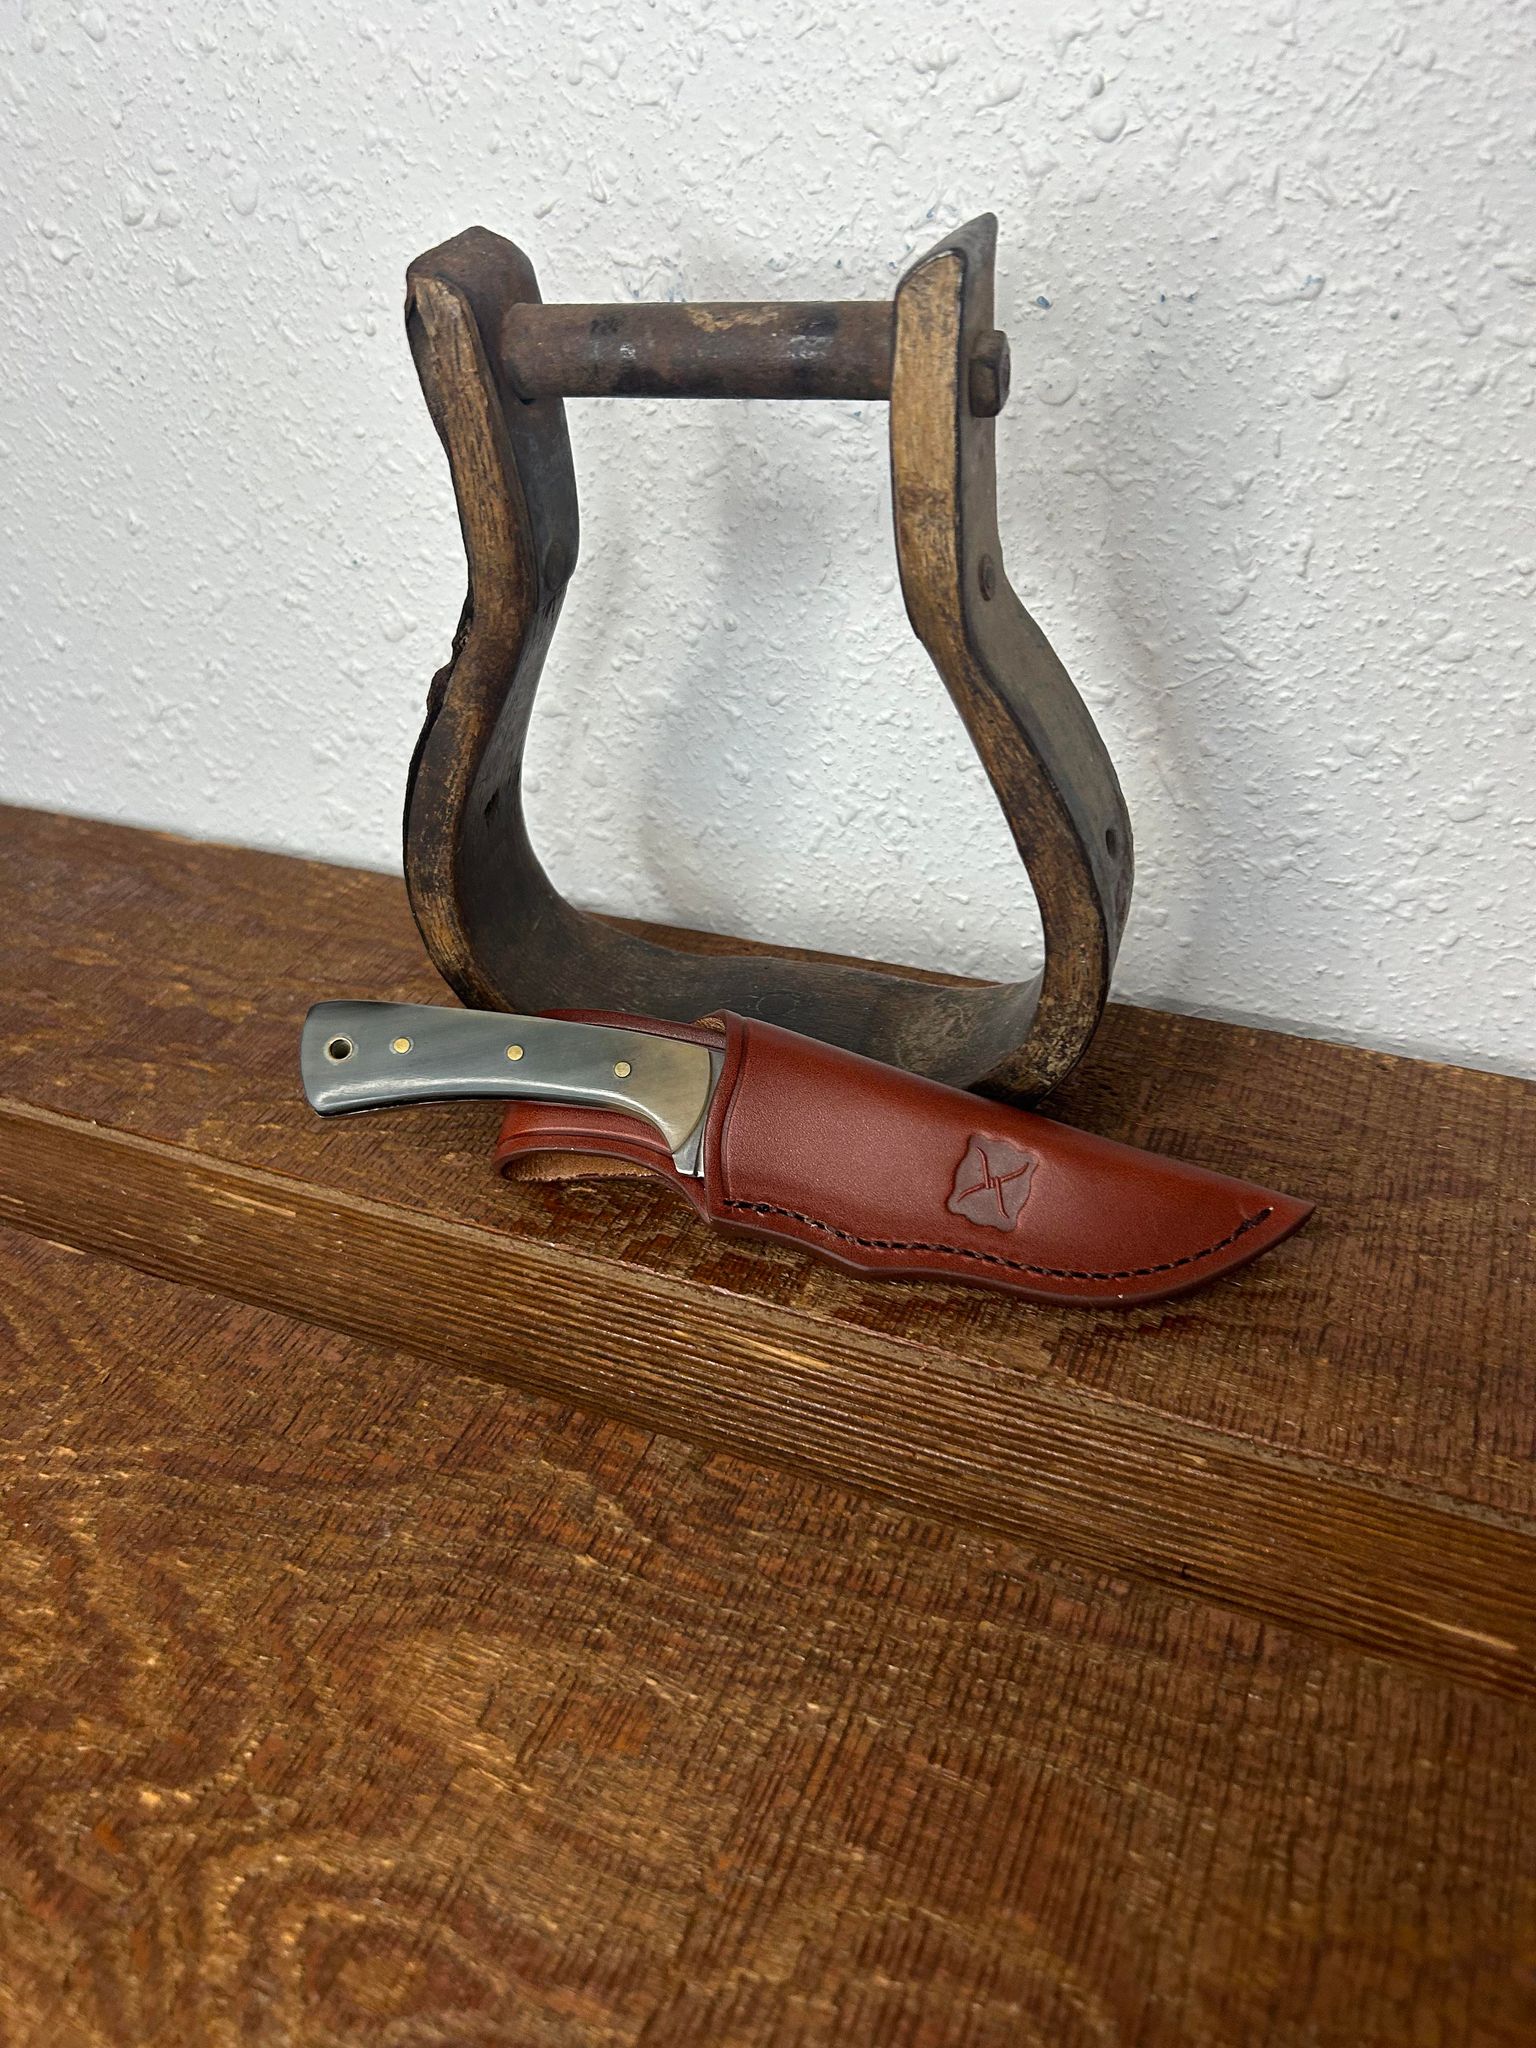 Twisted X Knife XL115-Knives-WESTERN FASHION ACCESSORIES-Lucky J Boots & More, Women's, Men's, & Kids Western Store Located in Carthage, MO